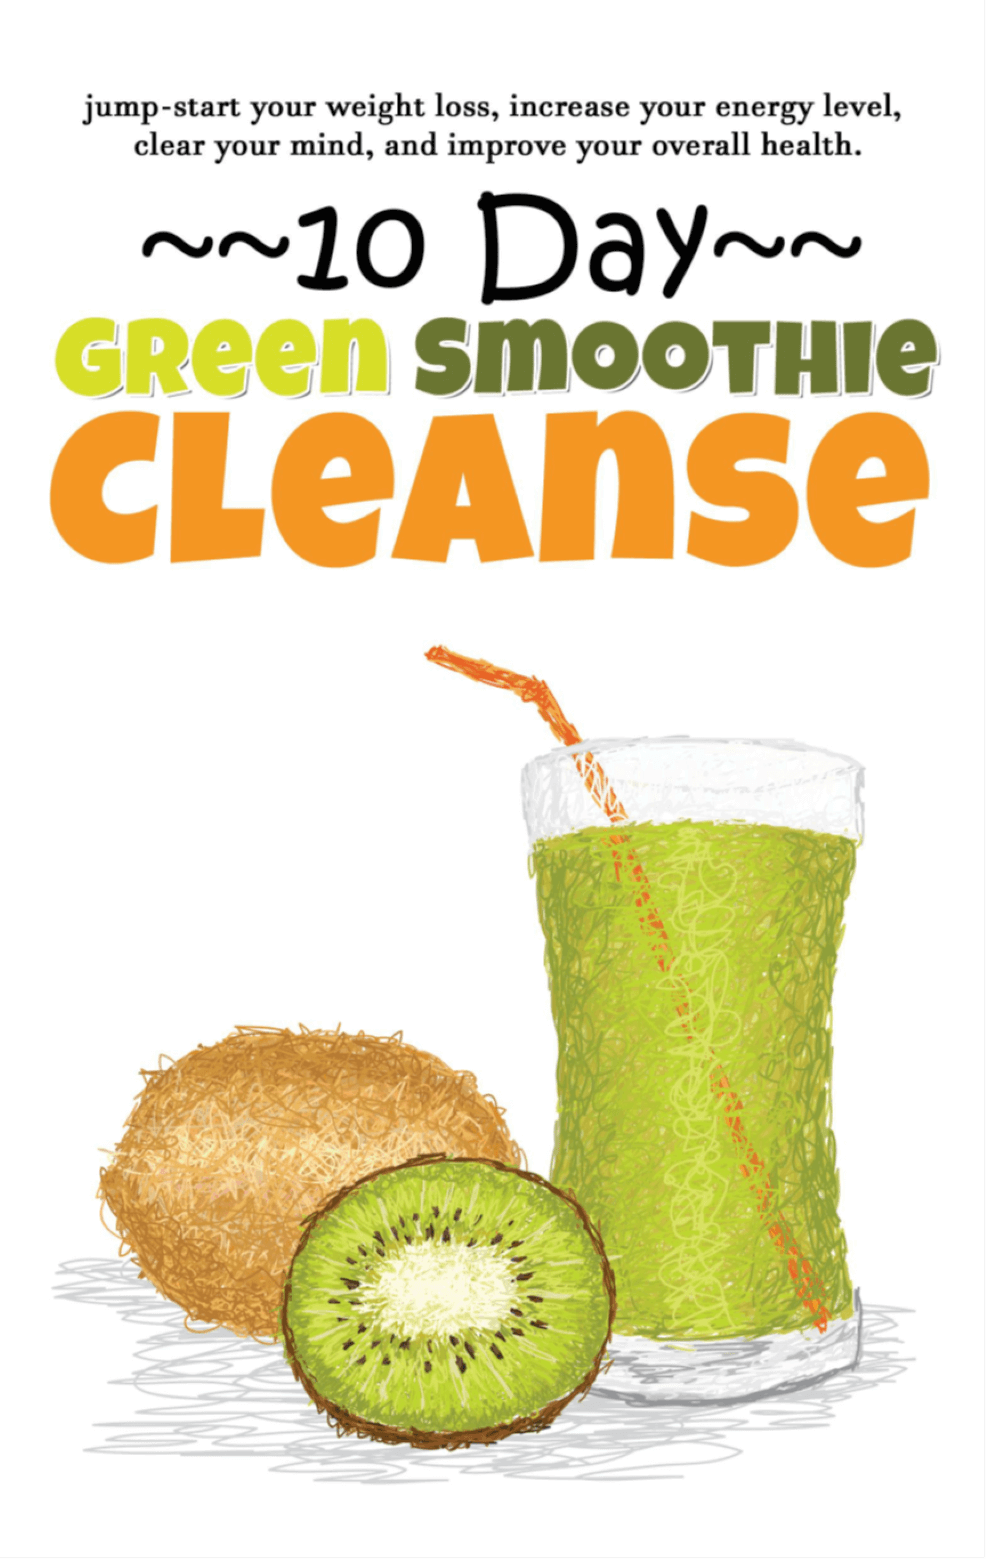 Green Smoothie Cleanse Video Upgrade